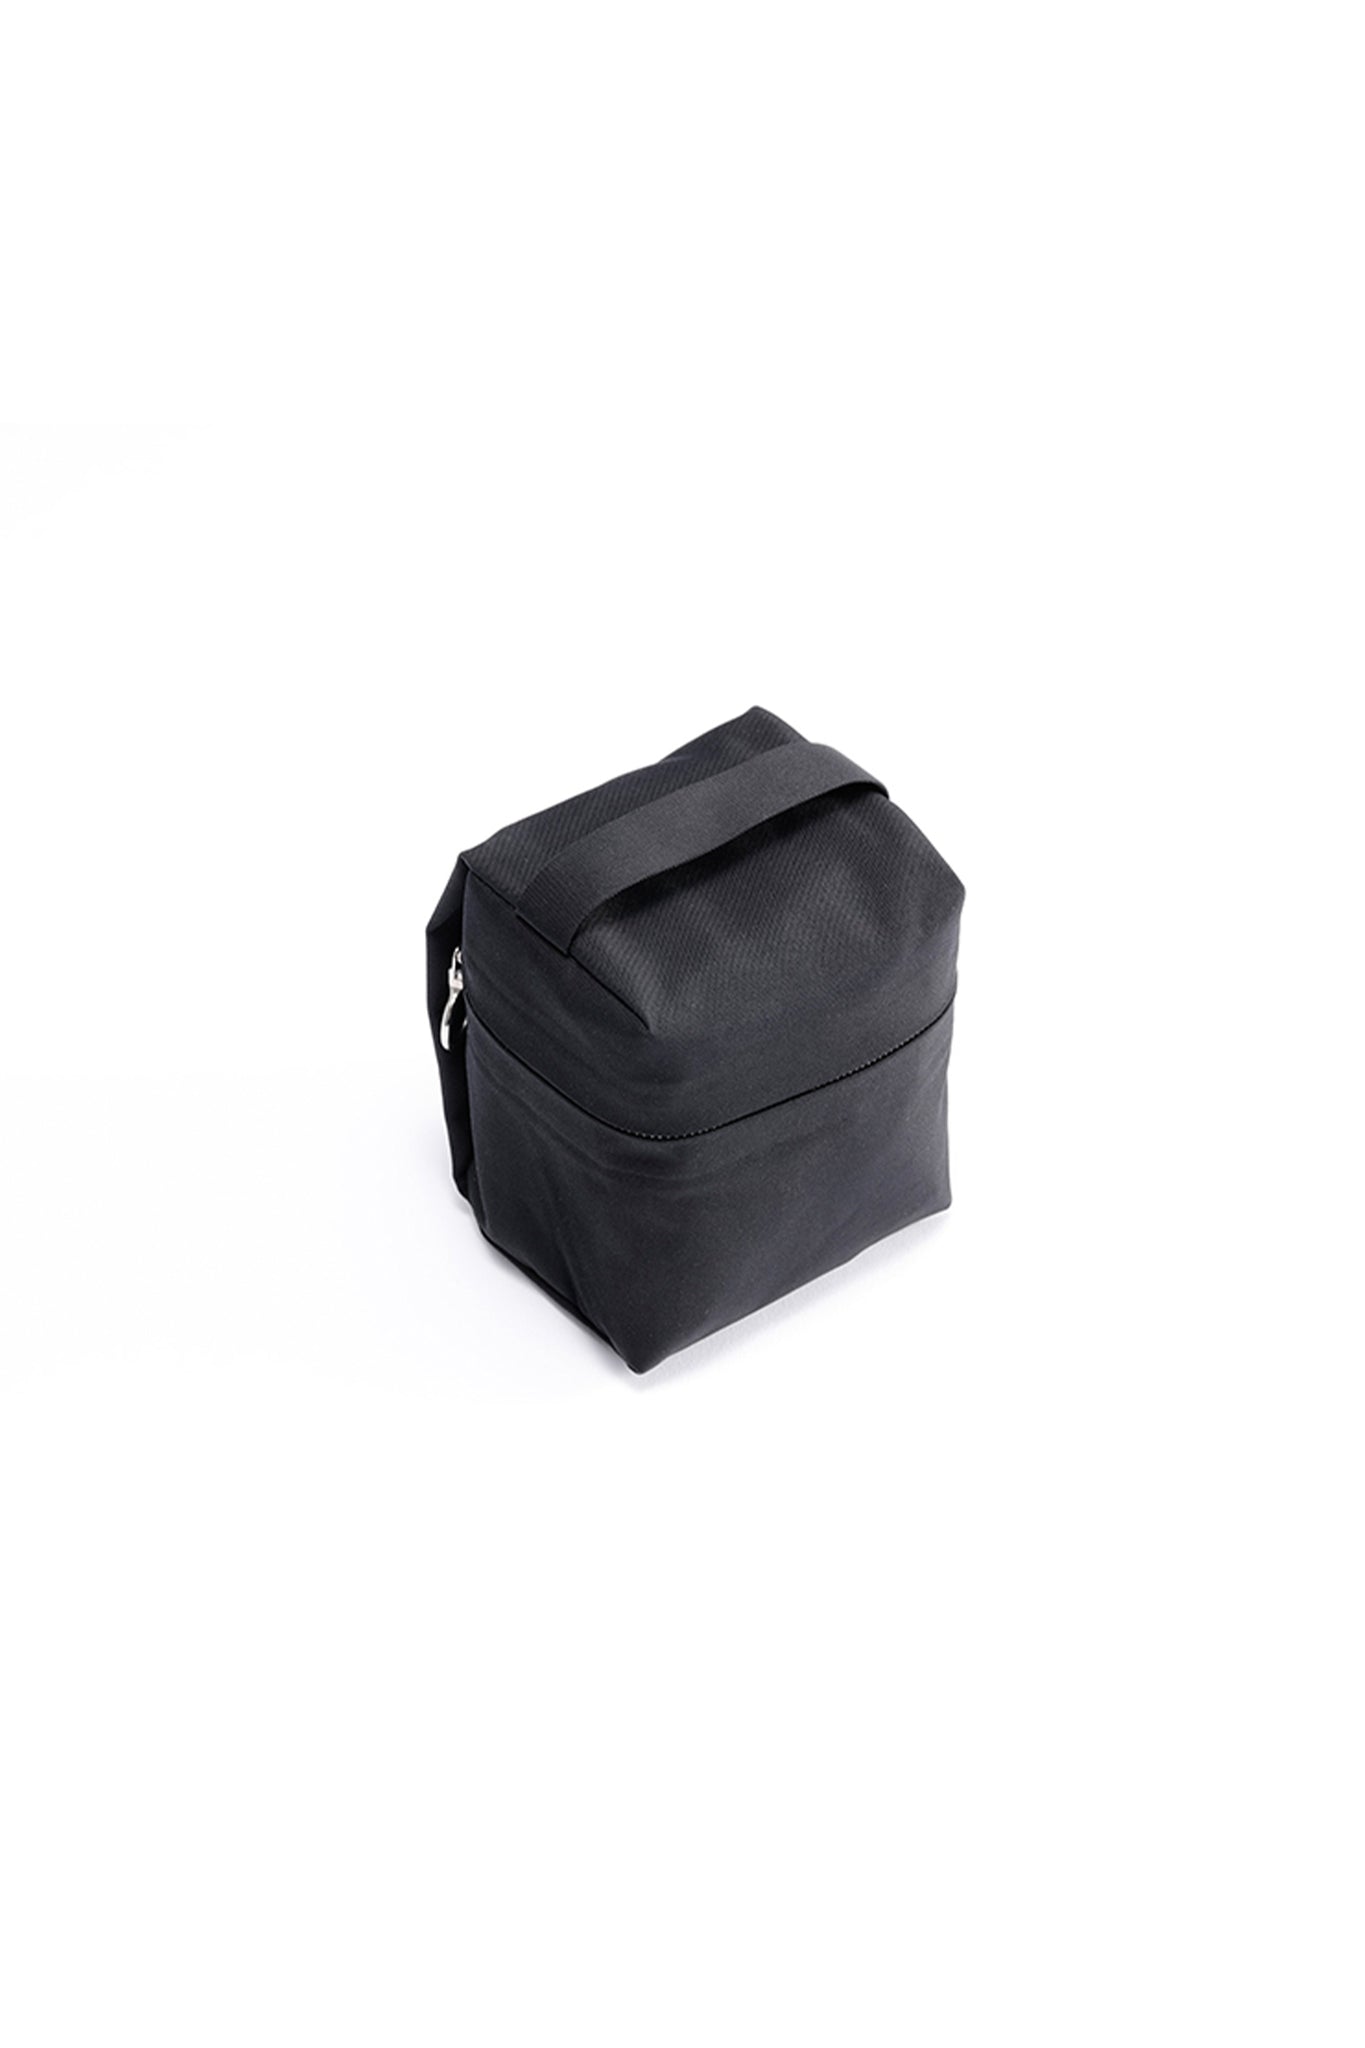 Aeta×THREE "AT04 COSMETIC POUCH S/ BLACK"